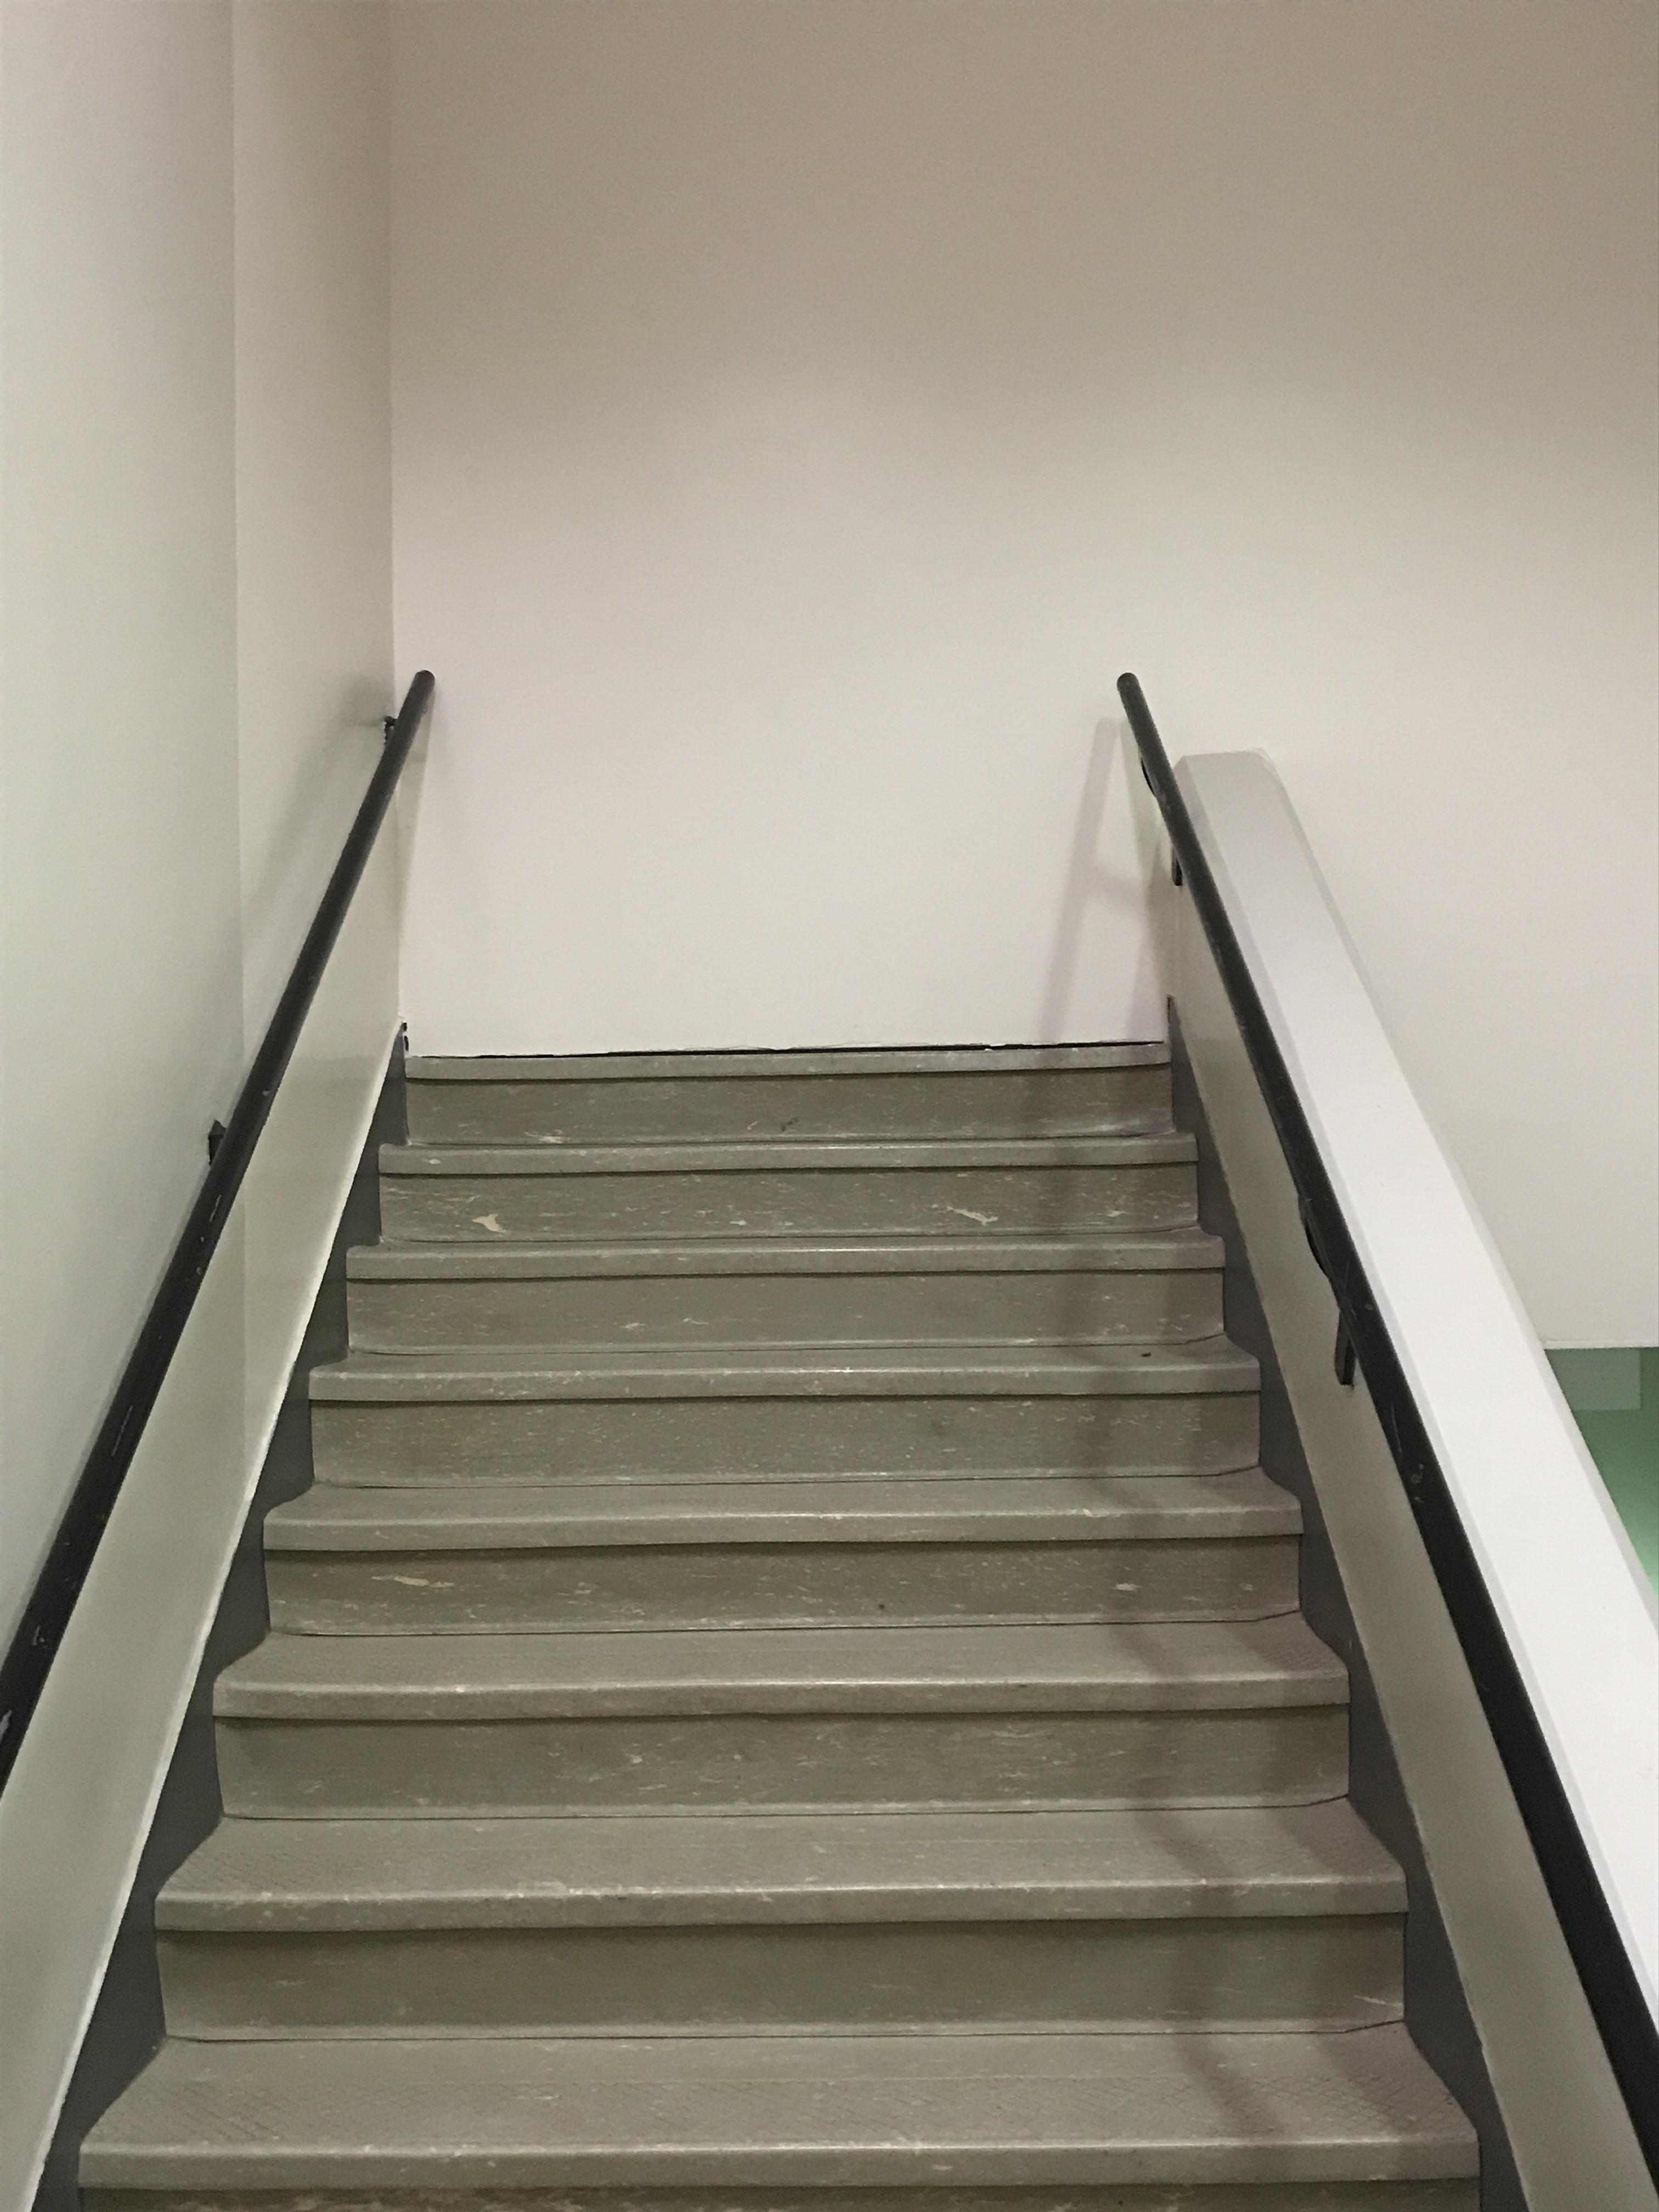 The stairs to nowhere, at Michigan technological university, an ...